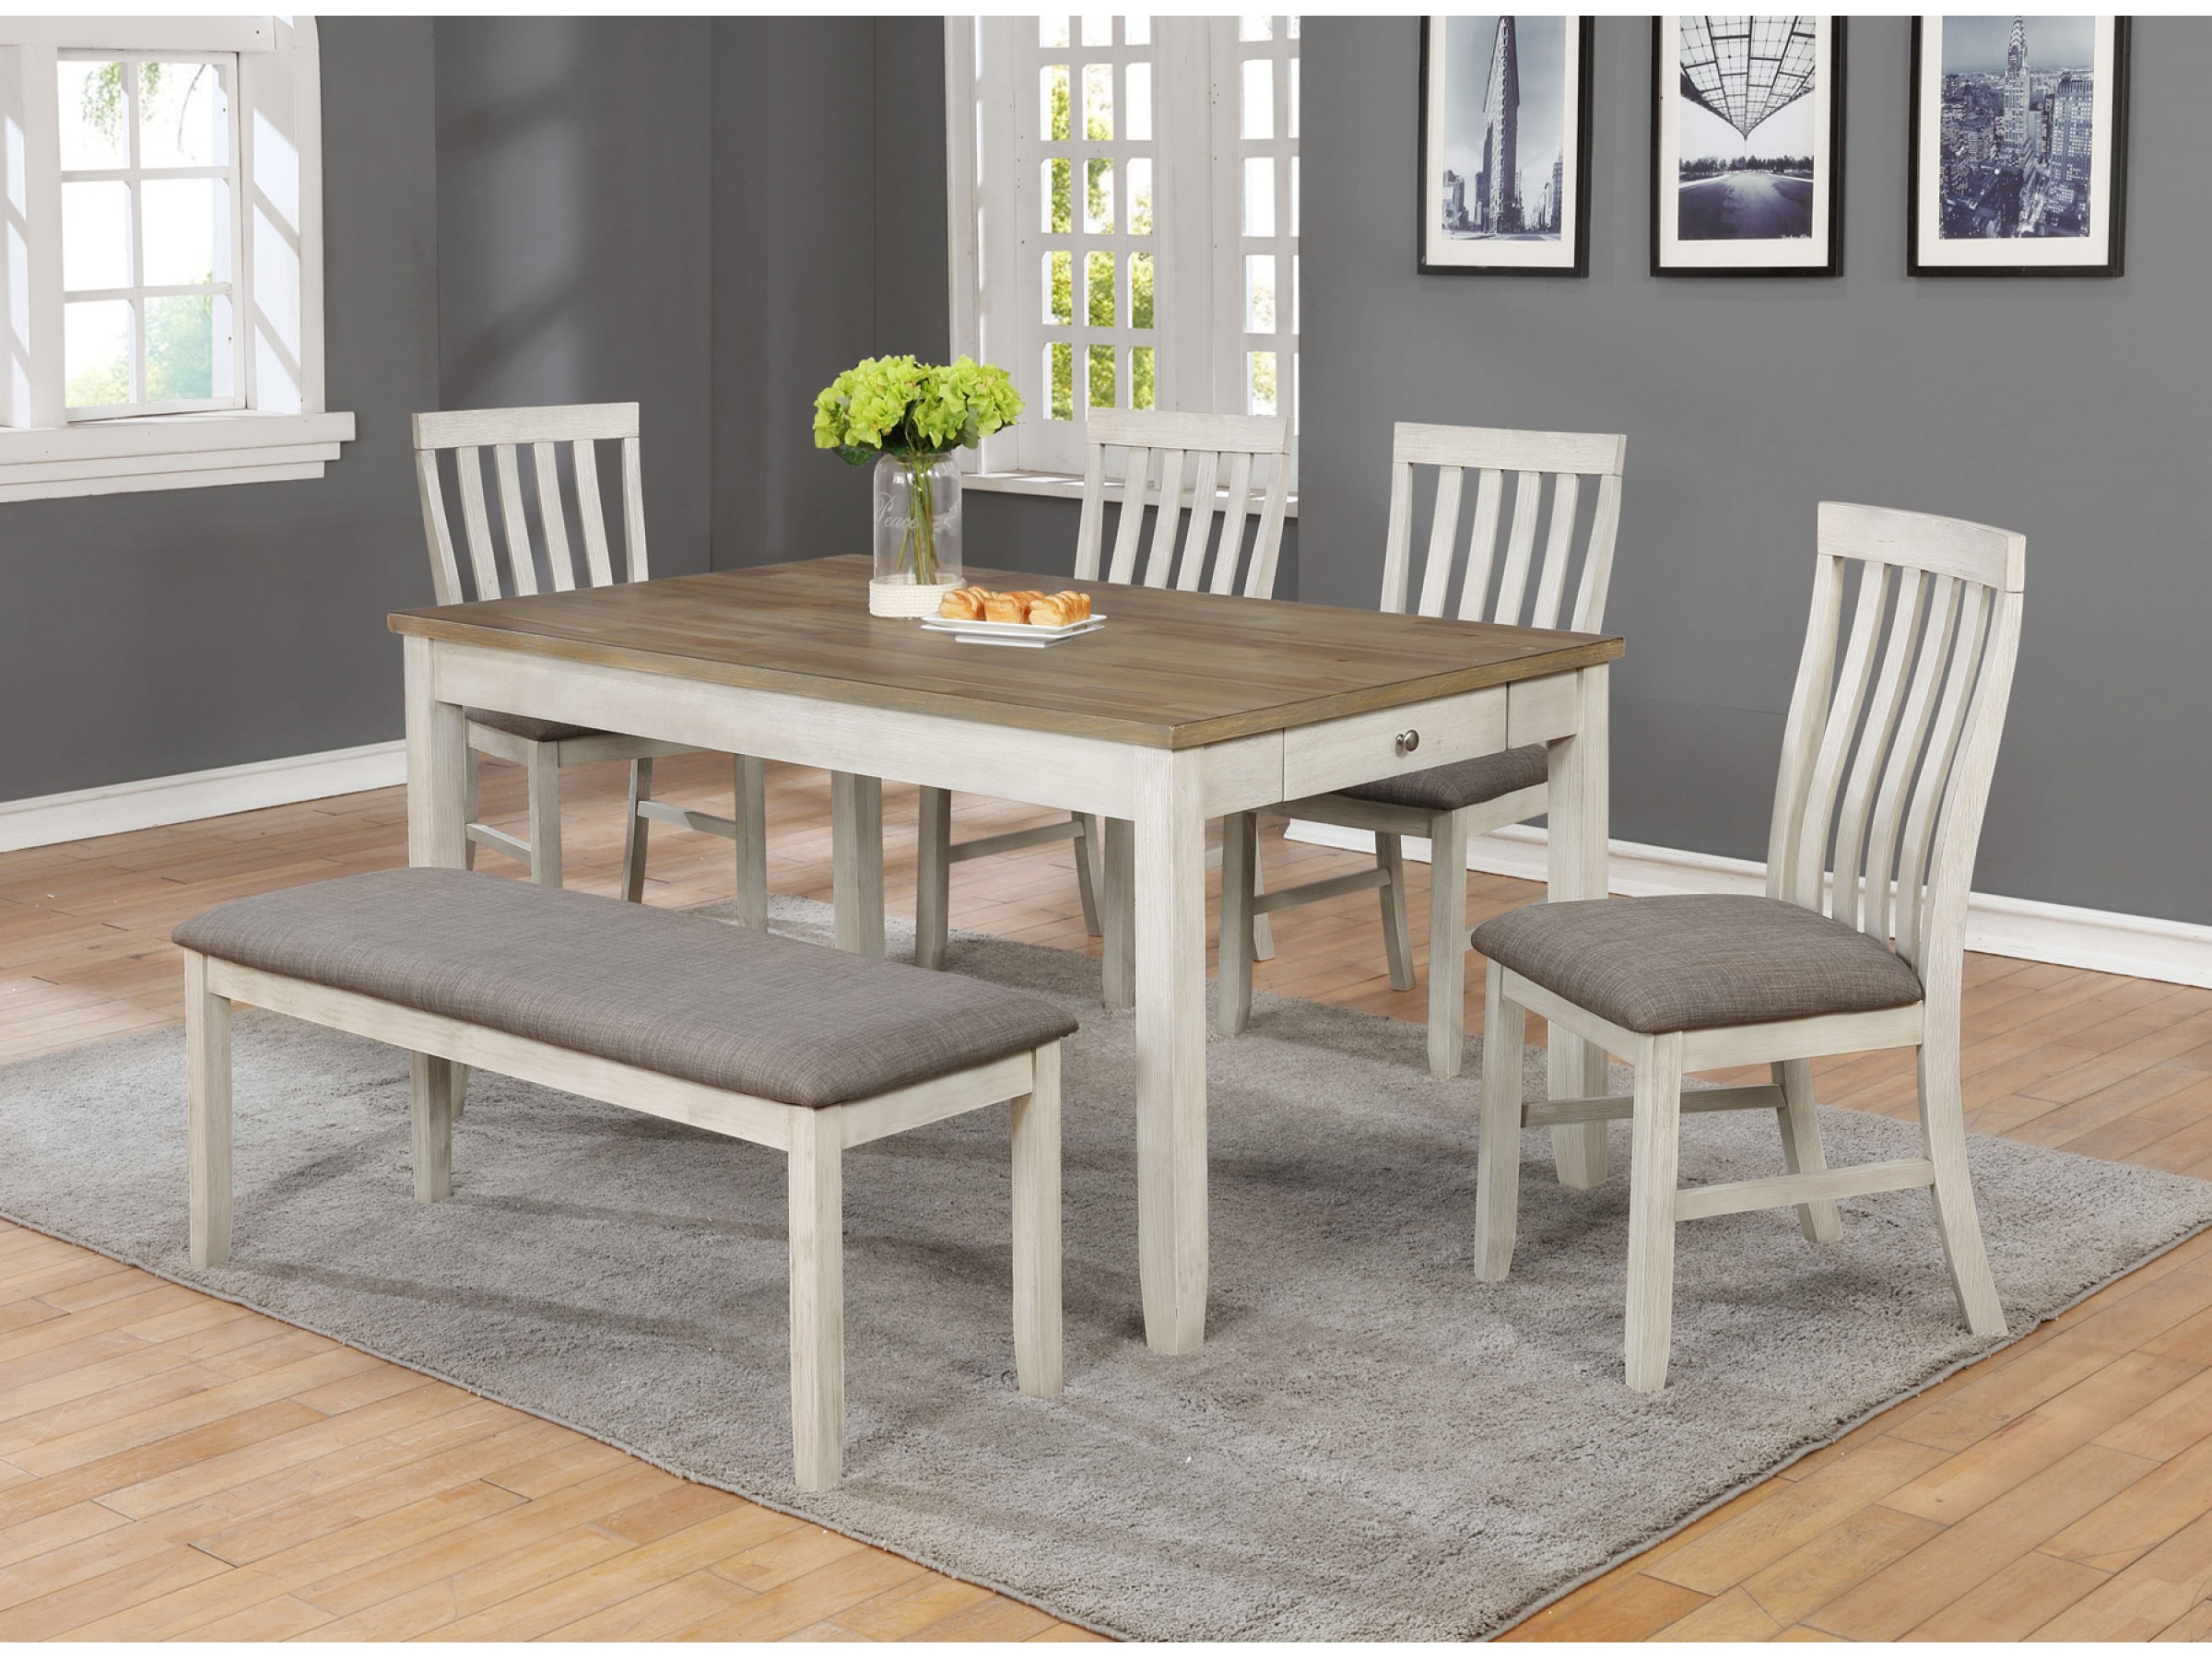 77cr221777, 30 X 60 Dining Room Table